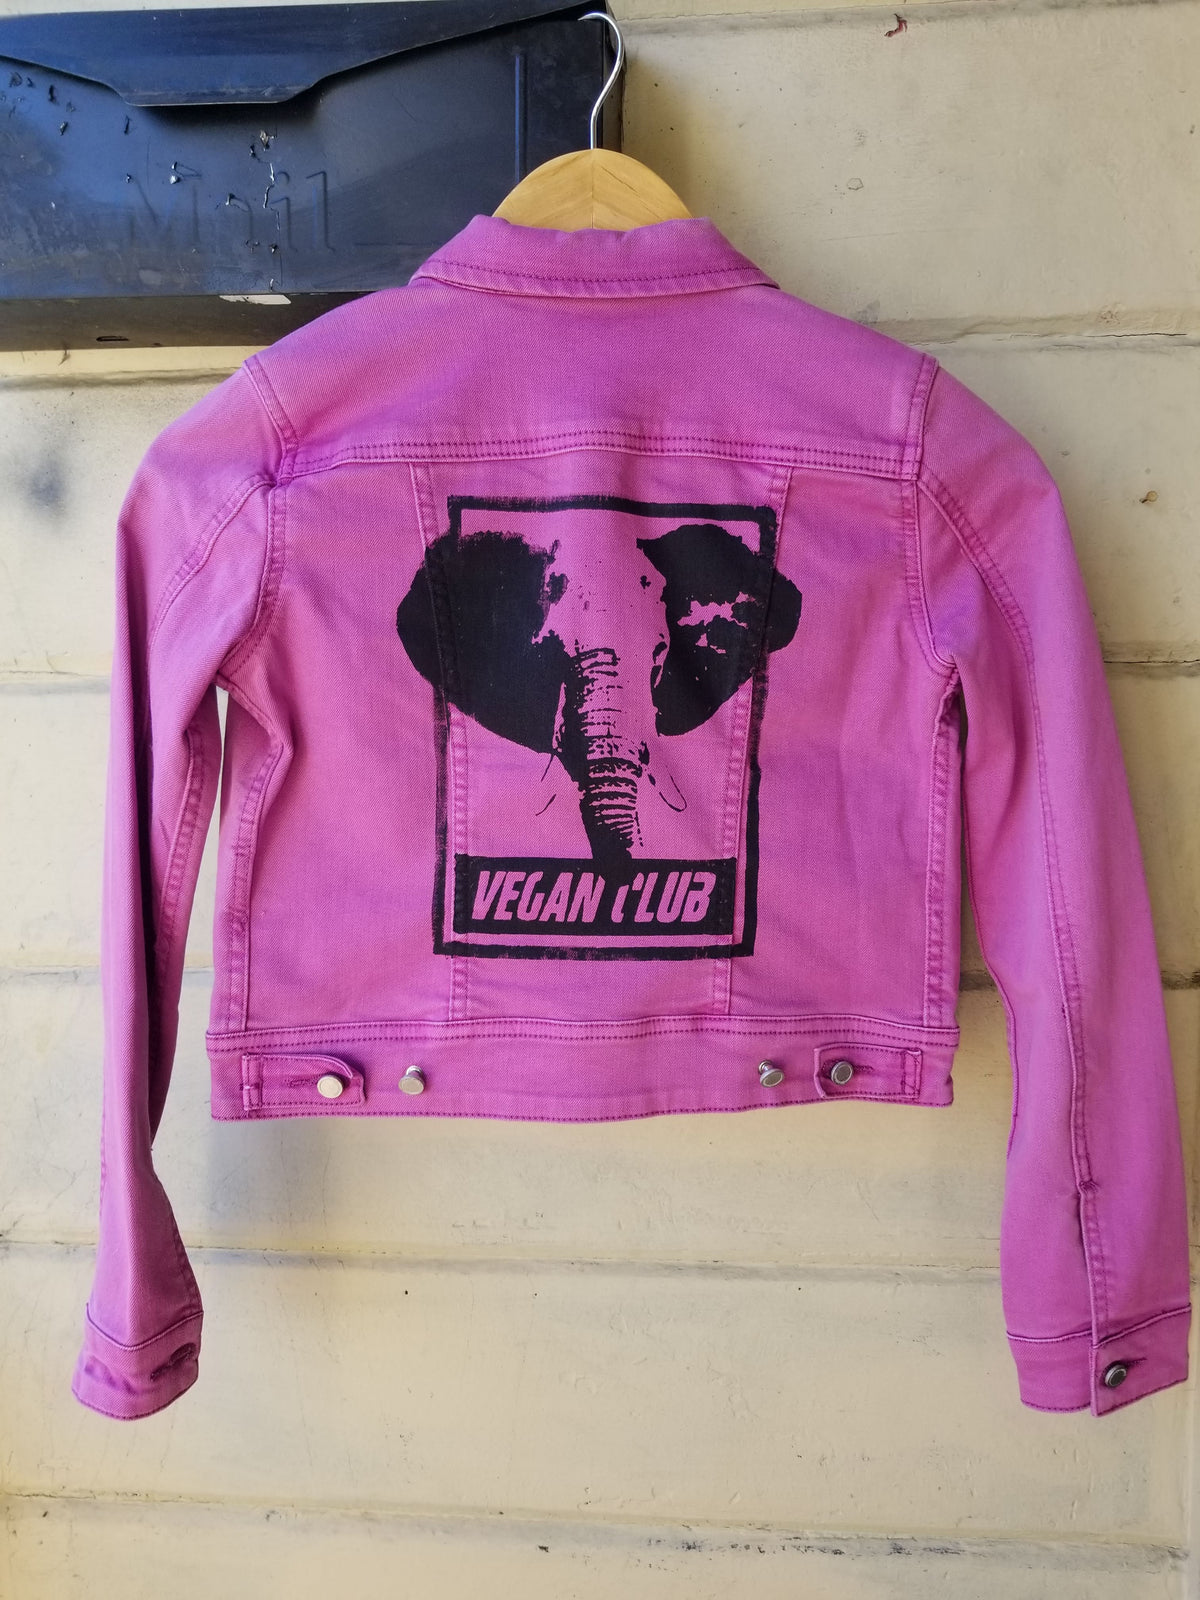 SOLD - One of a Kind Upcycled Purple Jean Jacket Vegan Club featuring an Elephant